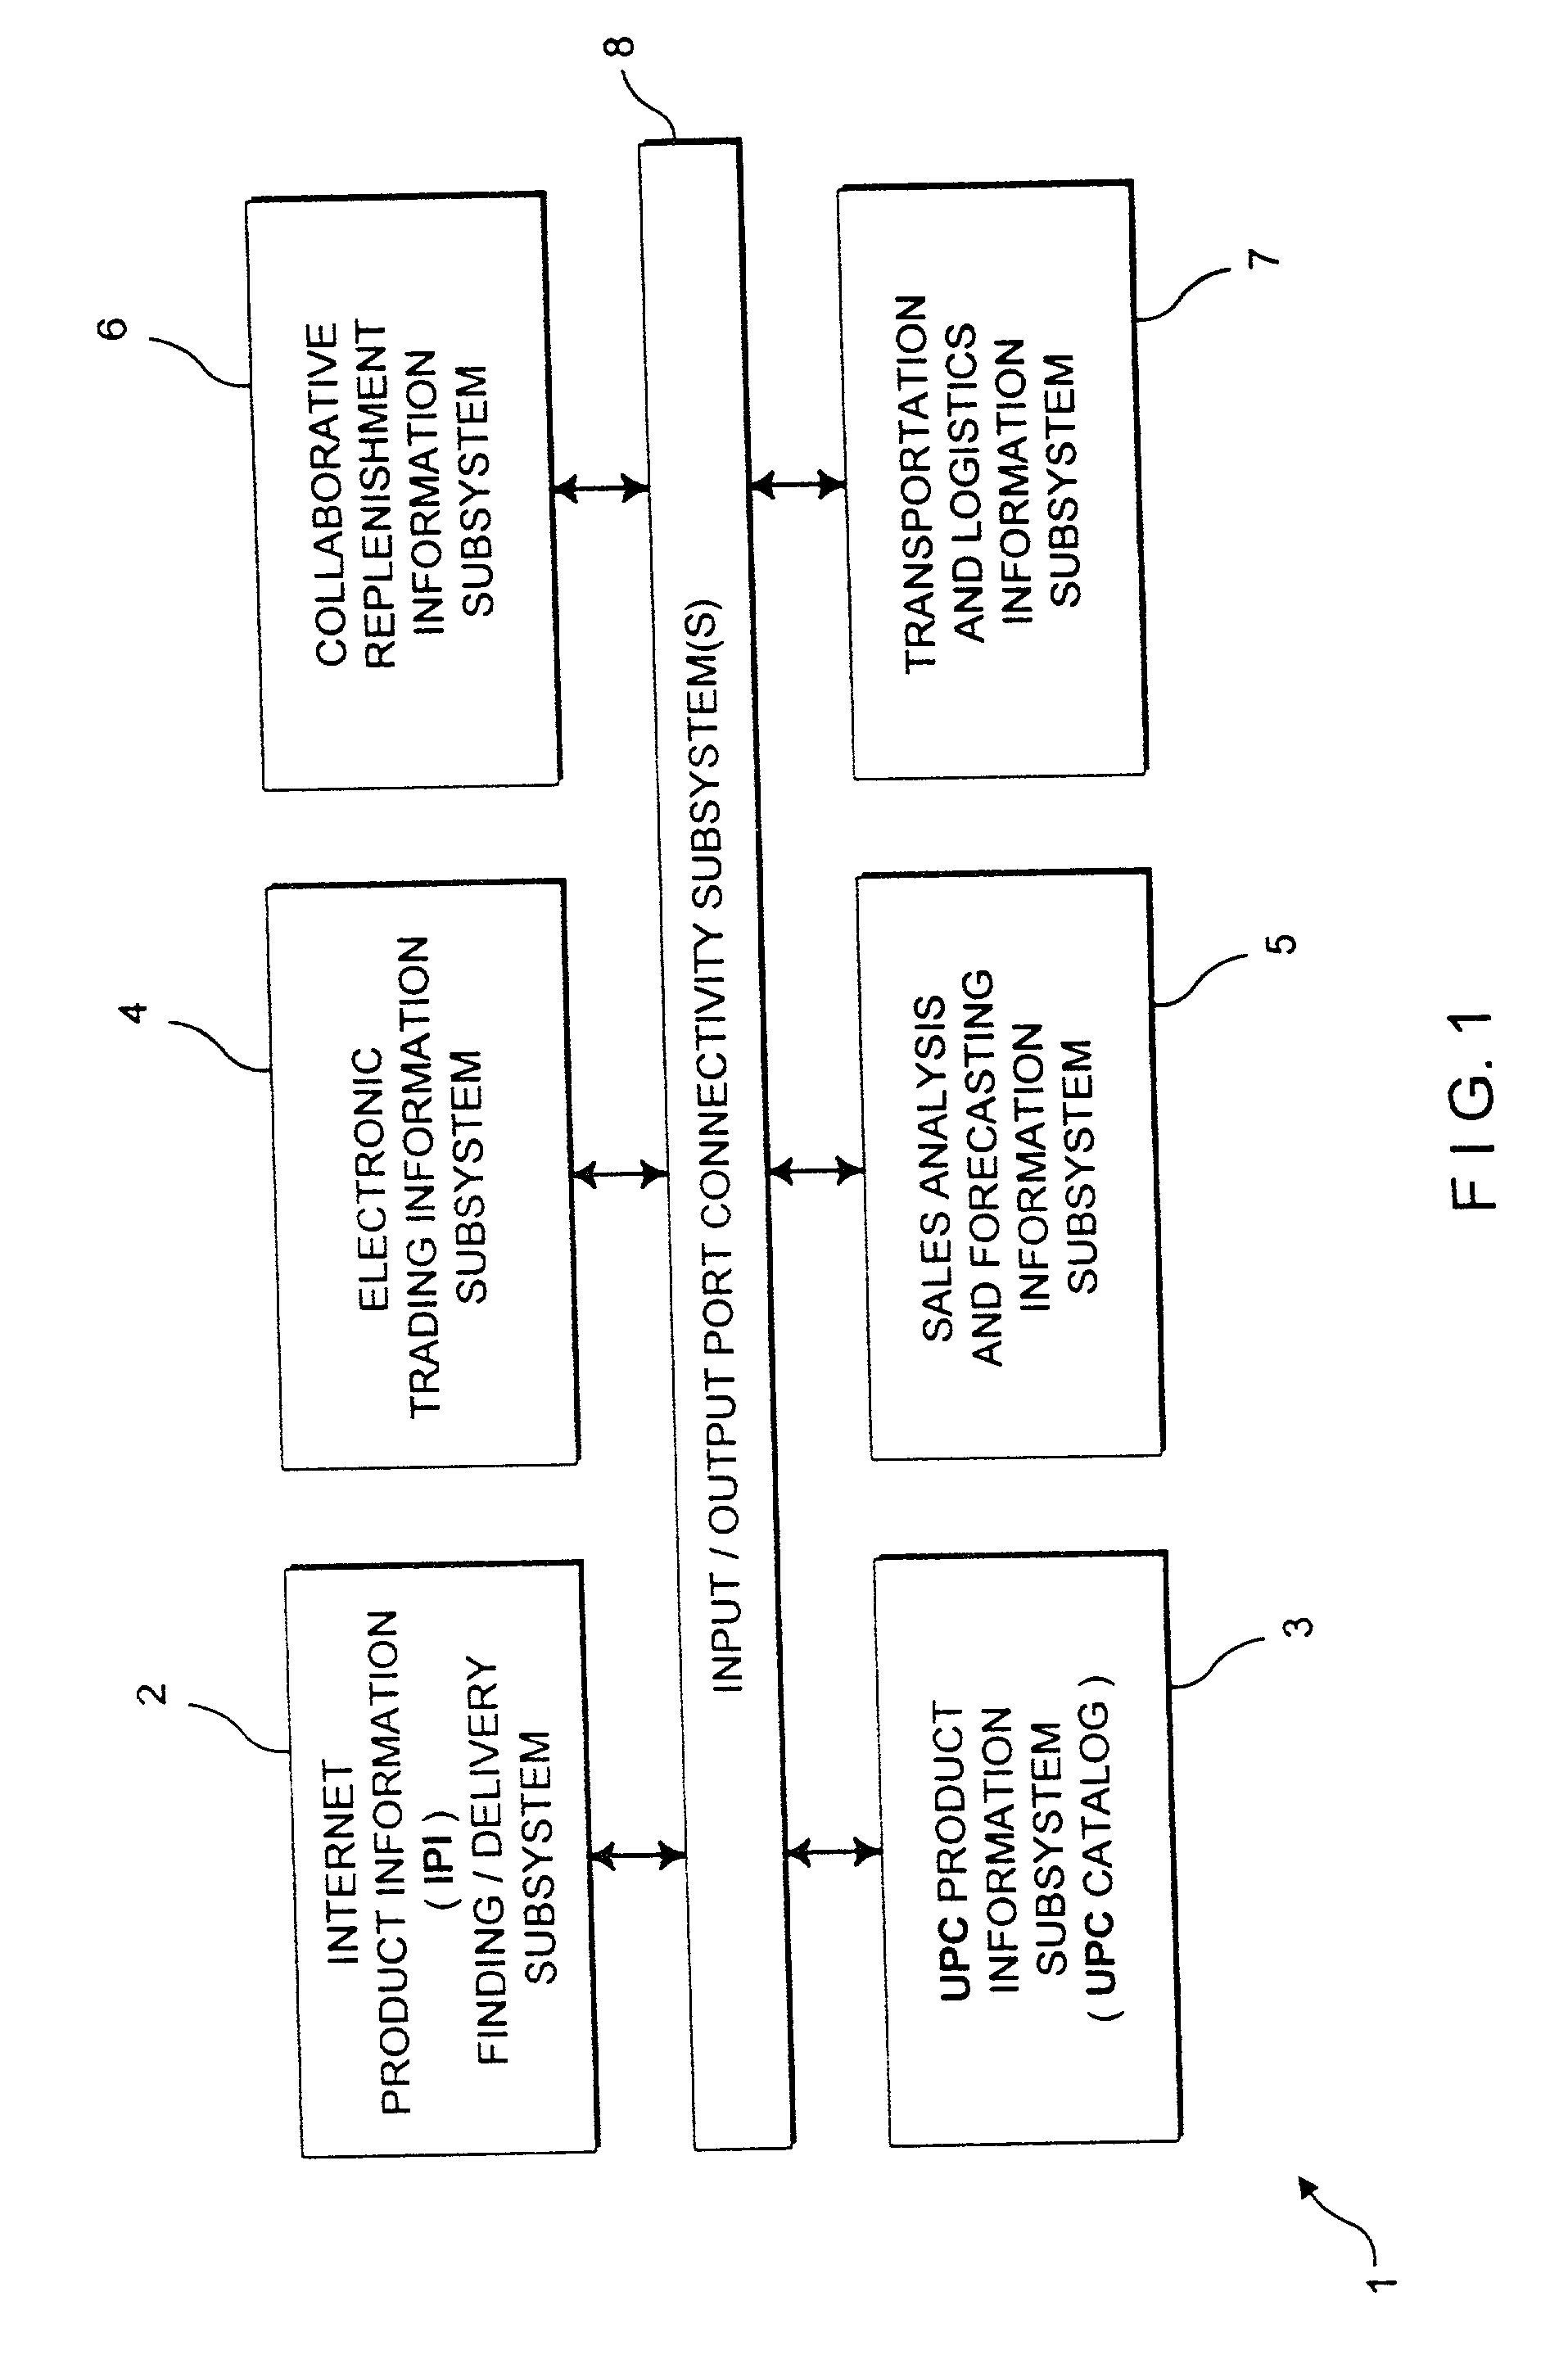 Method of and system for finding consumer product related information on the internet using UPN/TM/PD/URL data links stored in an internet-based relational database server